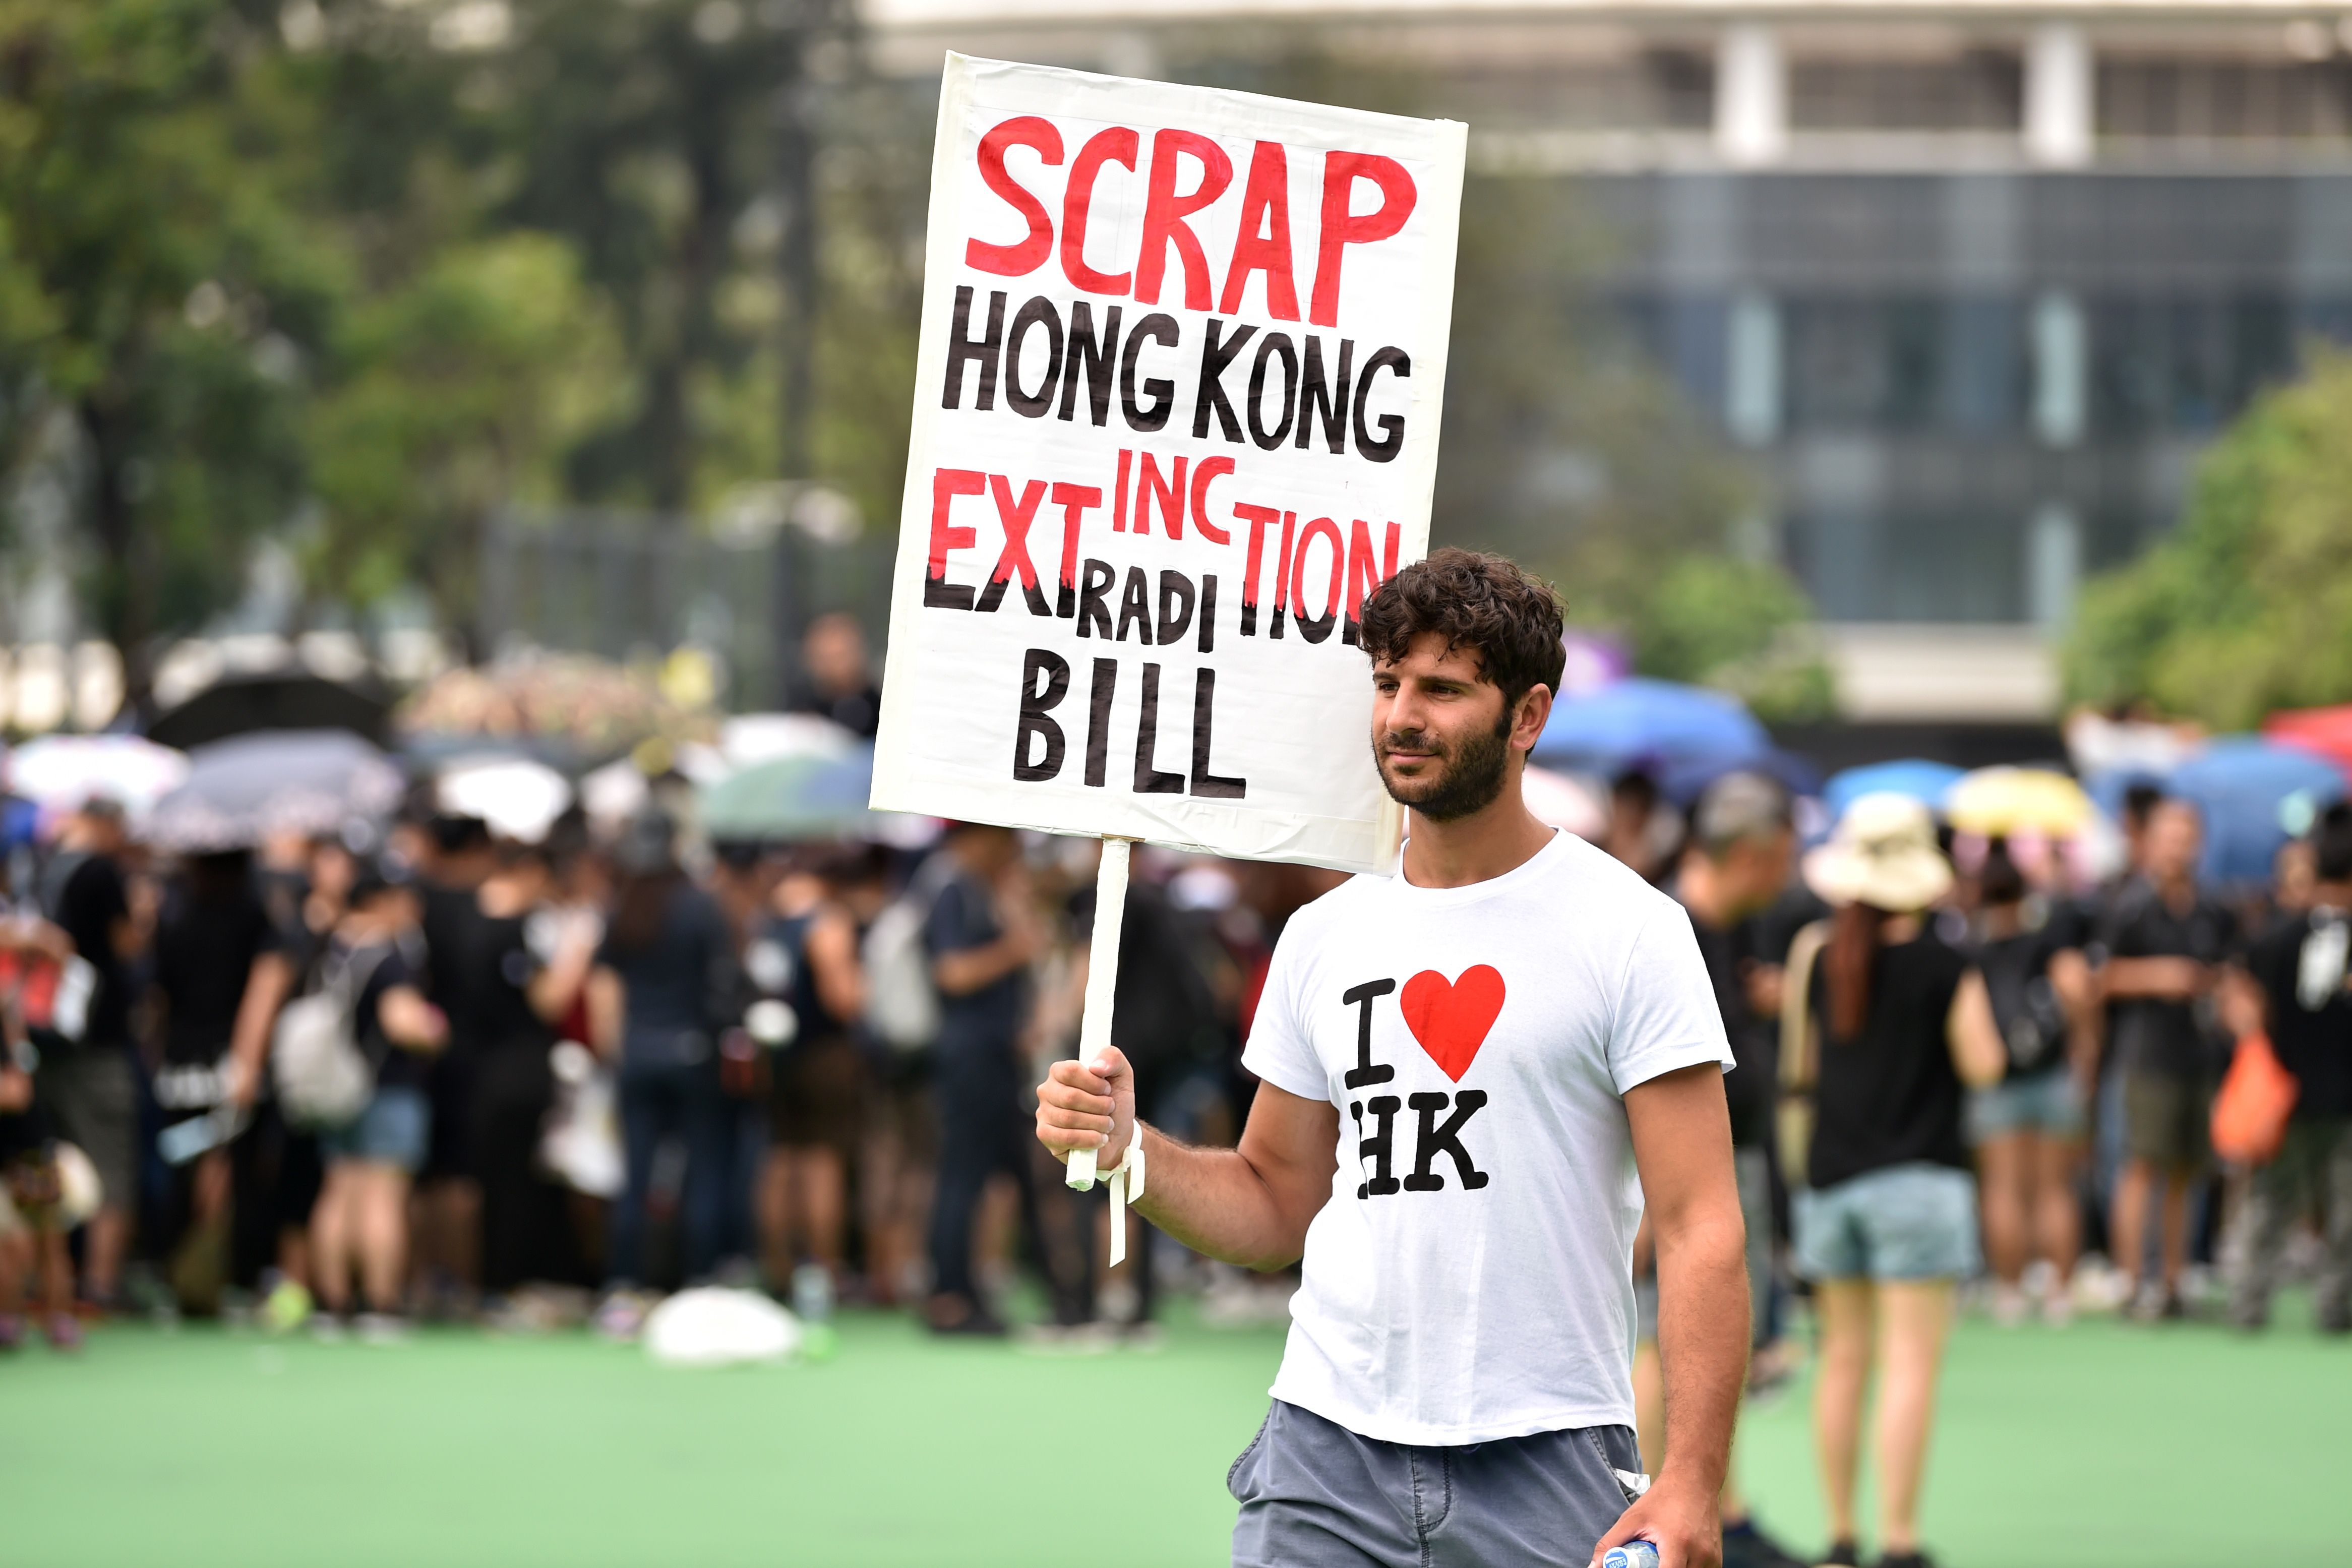 A protester holds up a placard as people gather ahead of a new rally.